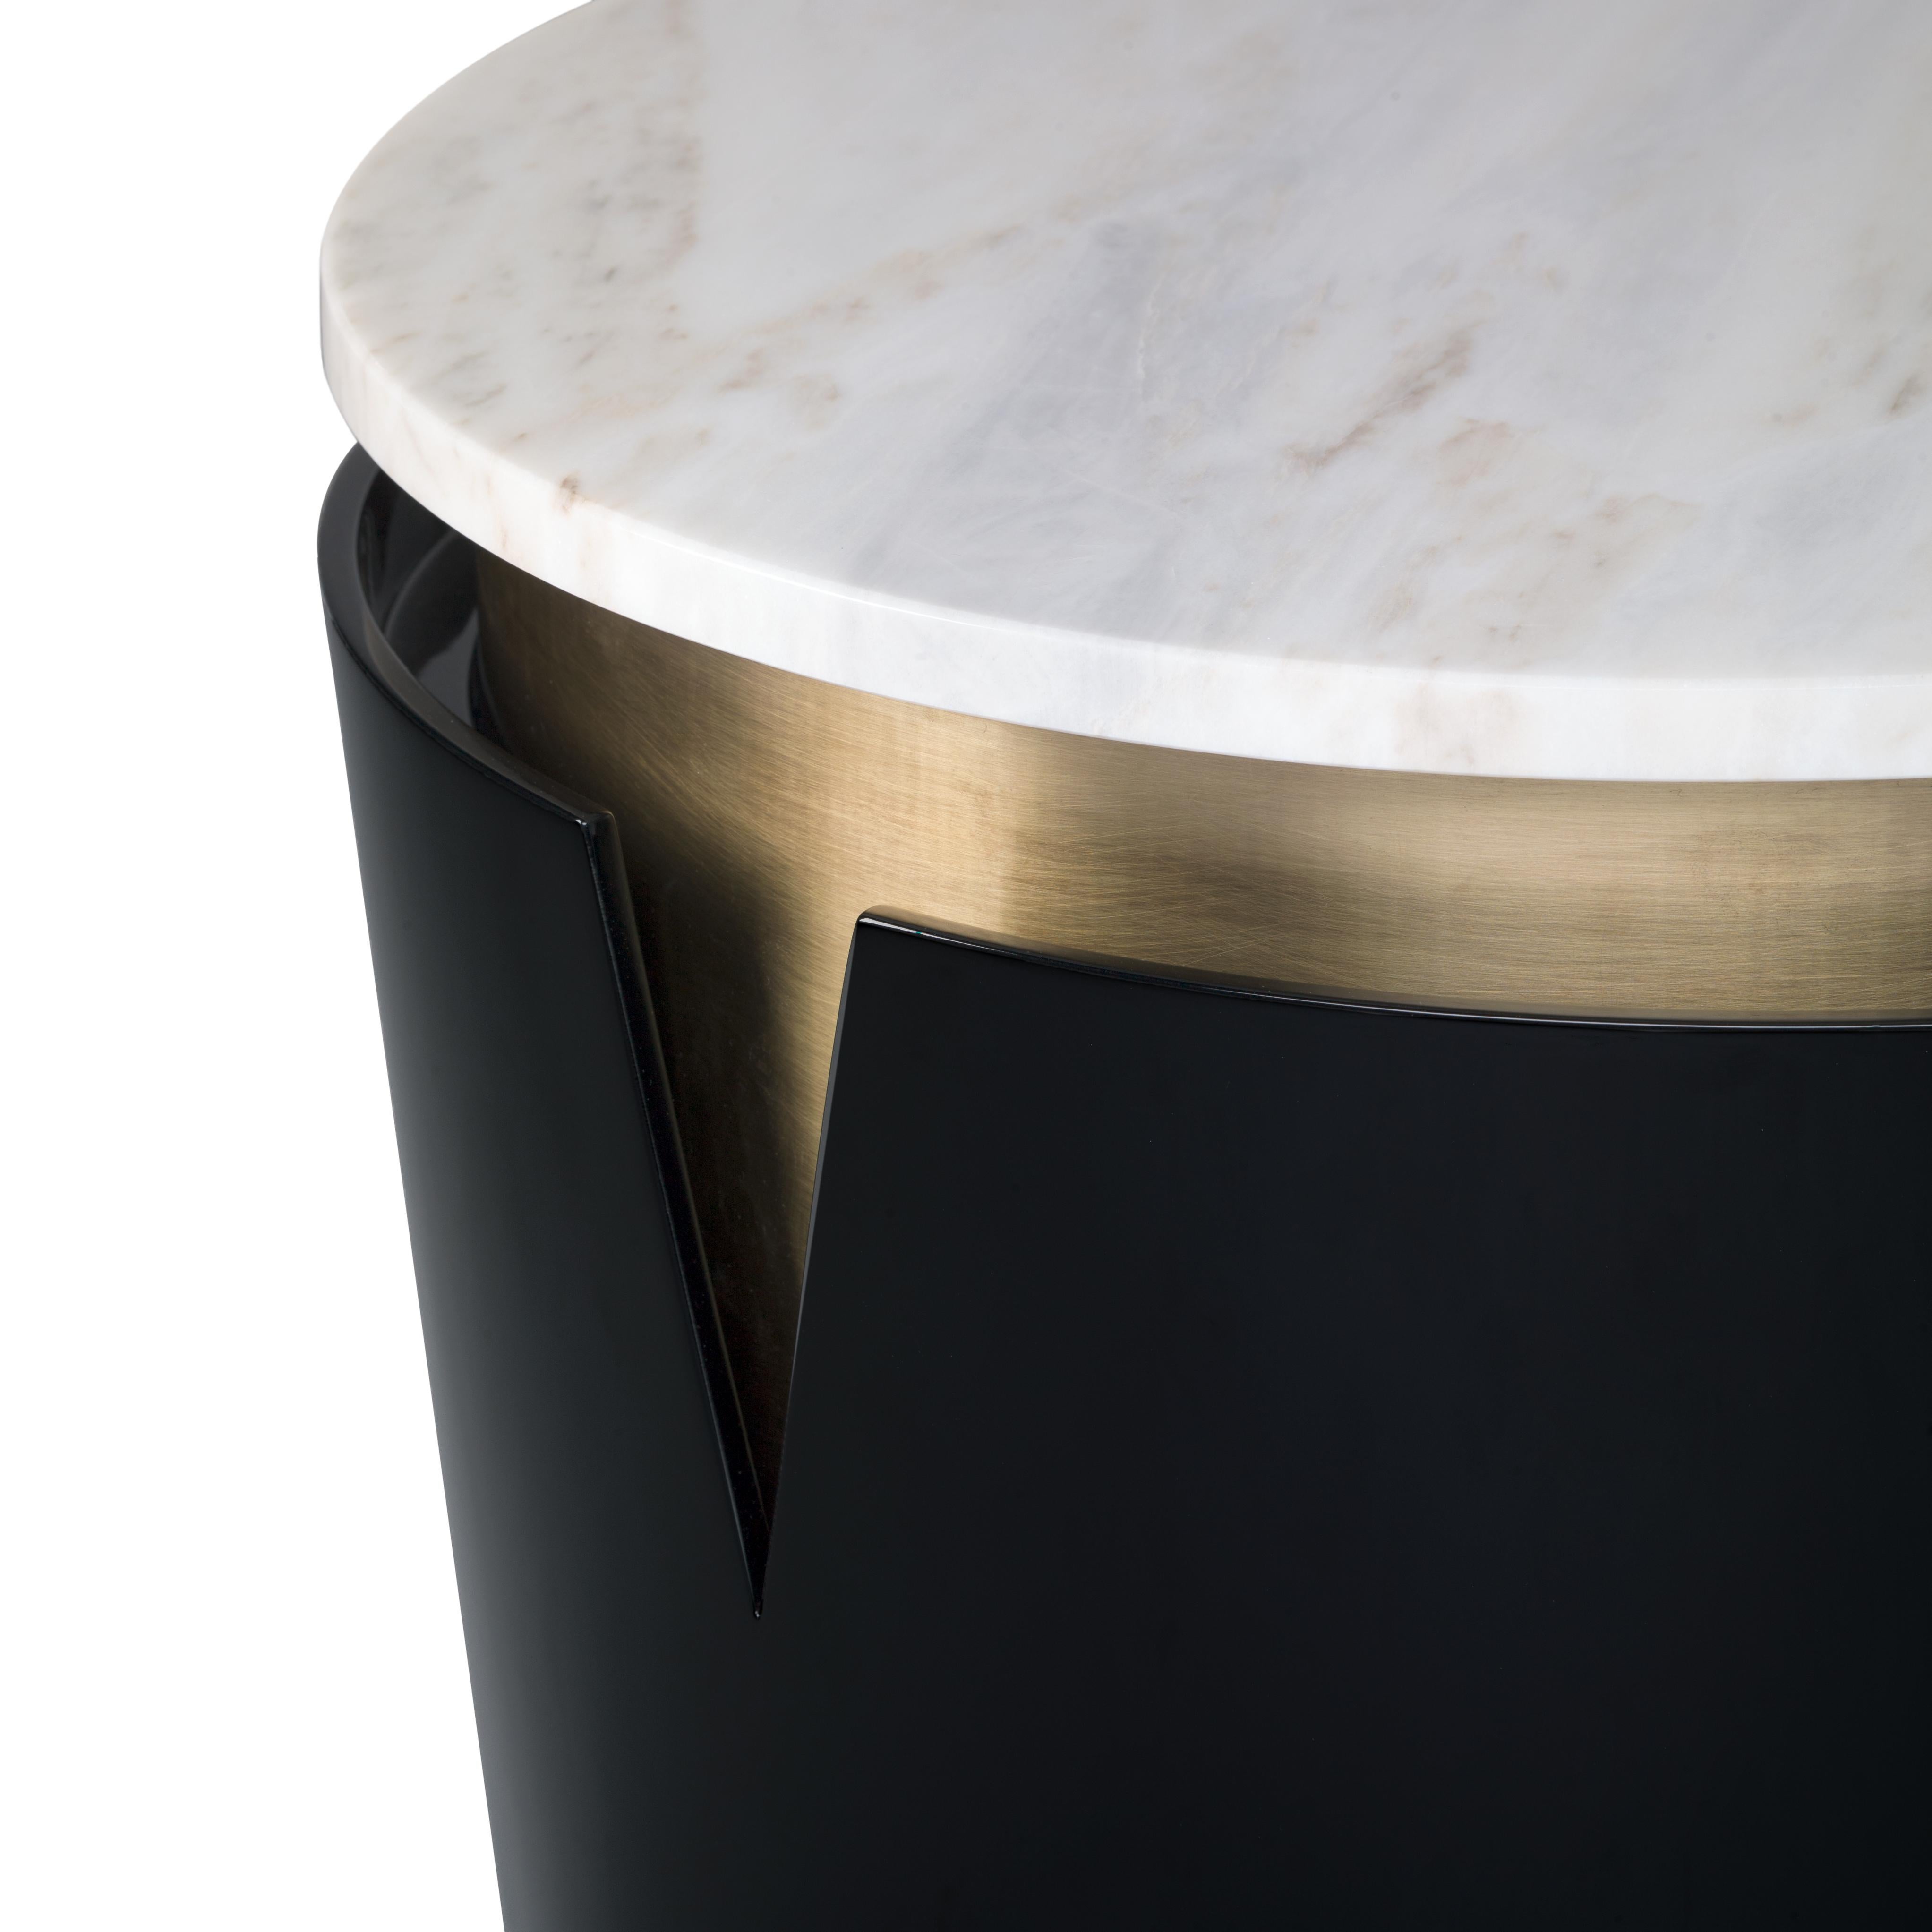 Moon Side Table Estremoz Marble Top and Brass, Handcrafted in Portugal by Duistt

The Moon side table is inspired by the architecture of the Givenchy flagship store. An intriguing design with a brushed brass detail cut and estremoz marble